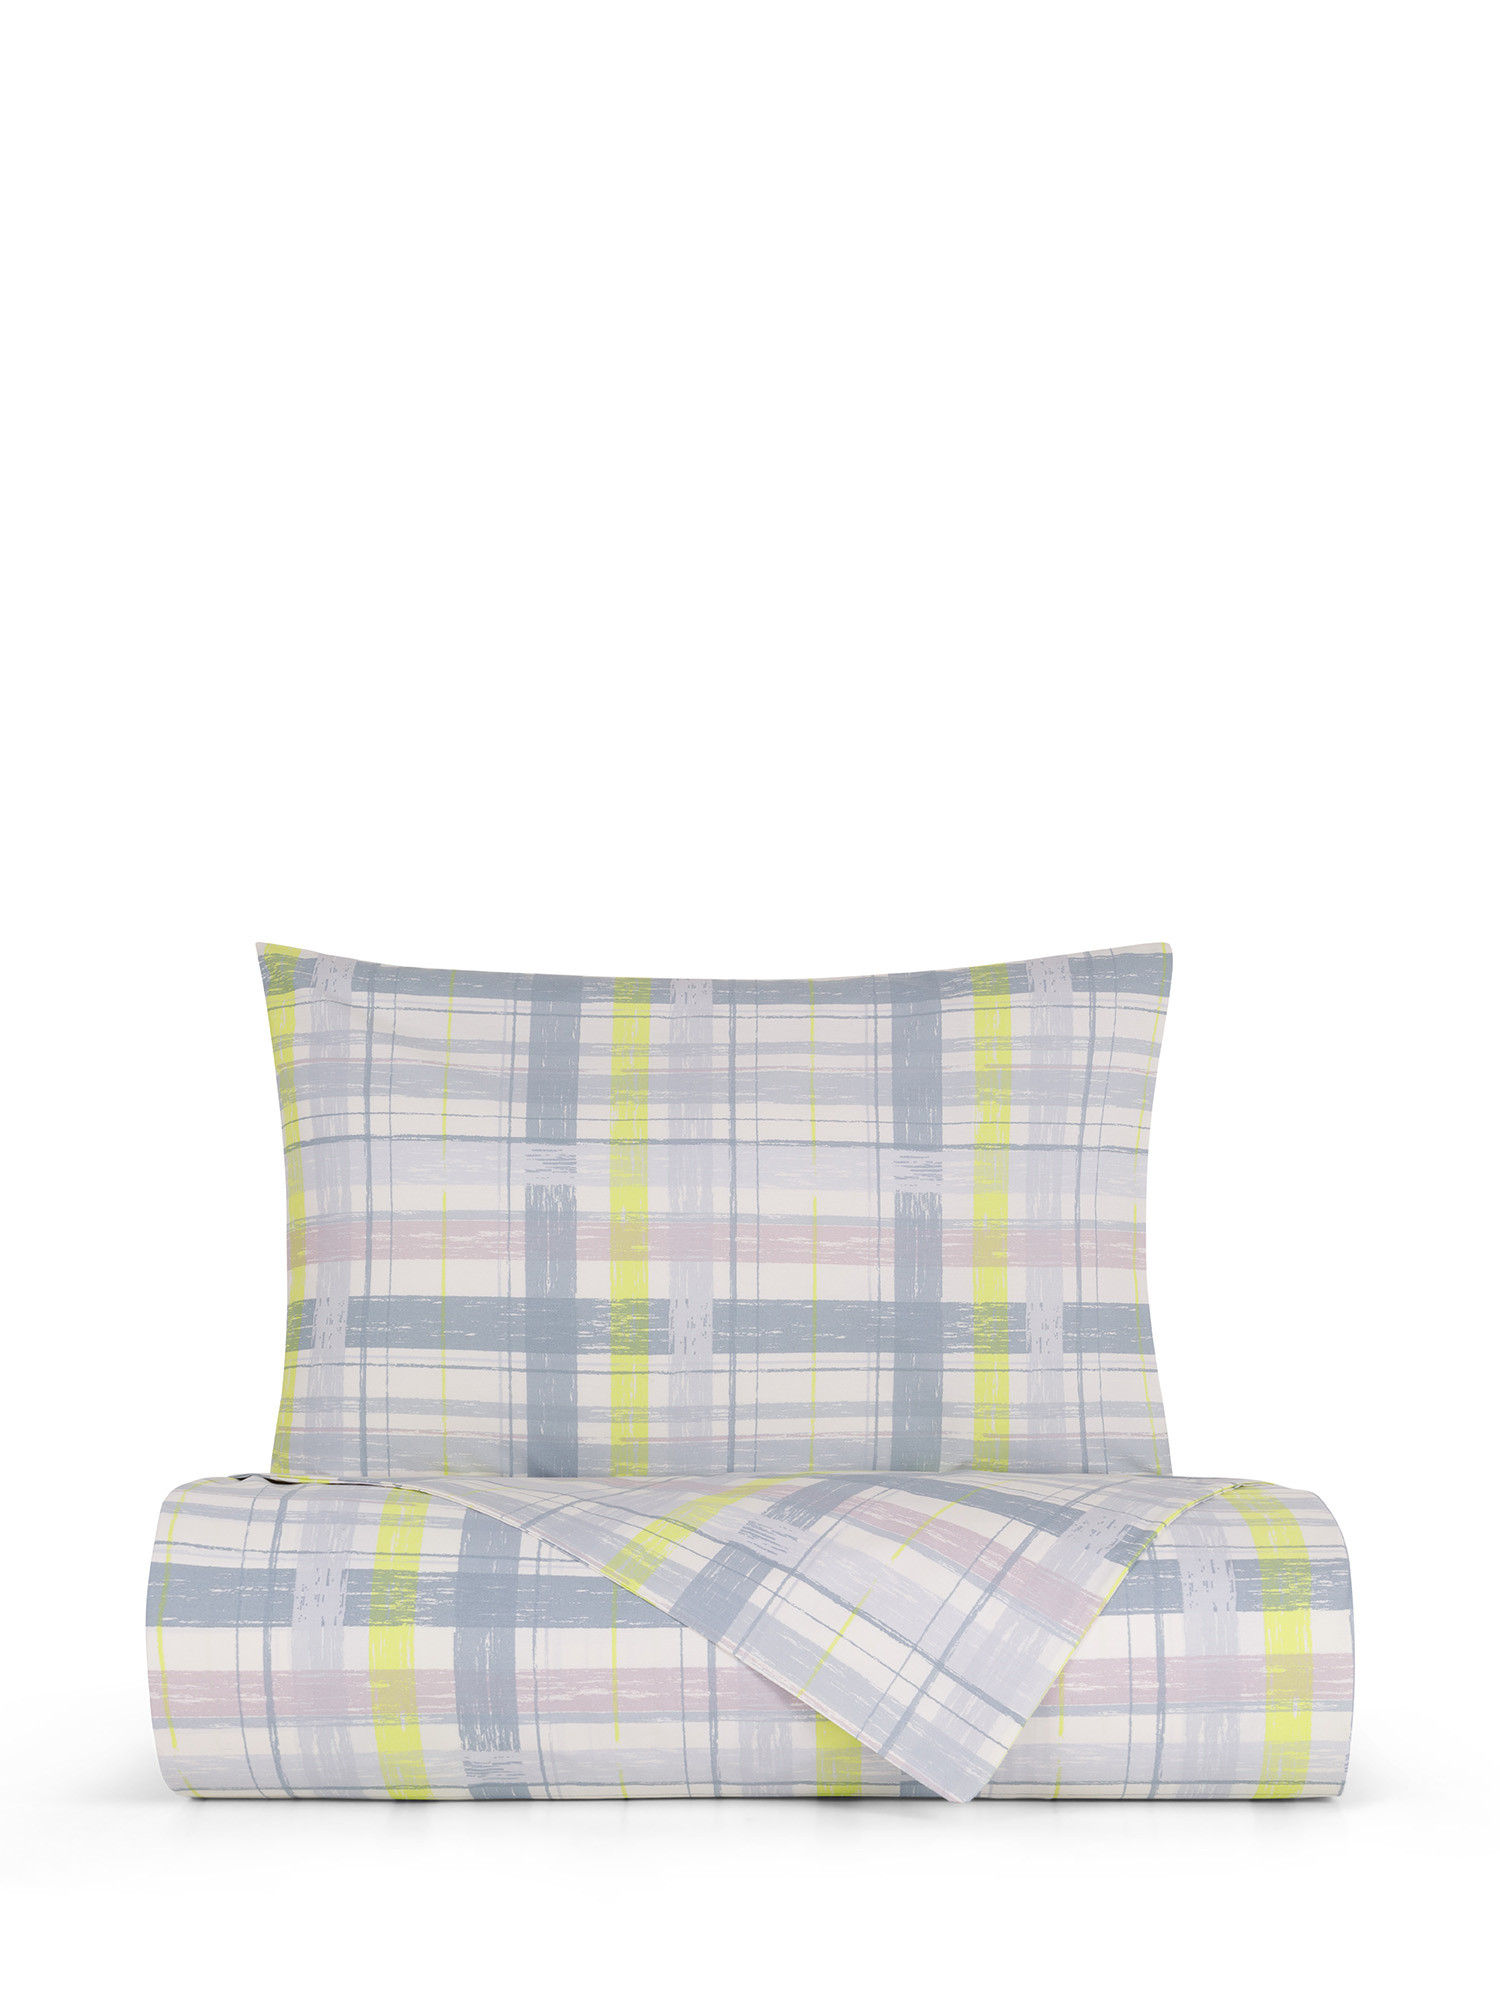 Cotton percale duvet cover with check print, Multicolor, large image number 0